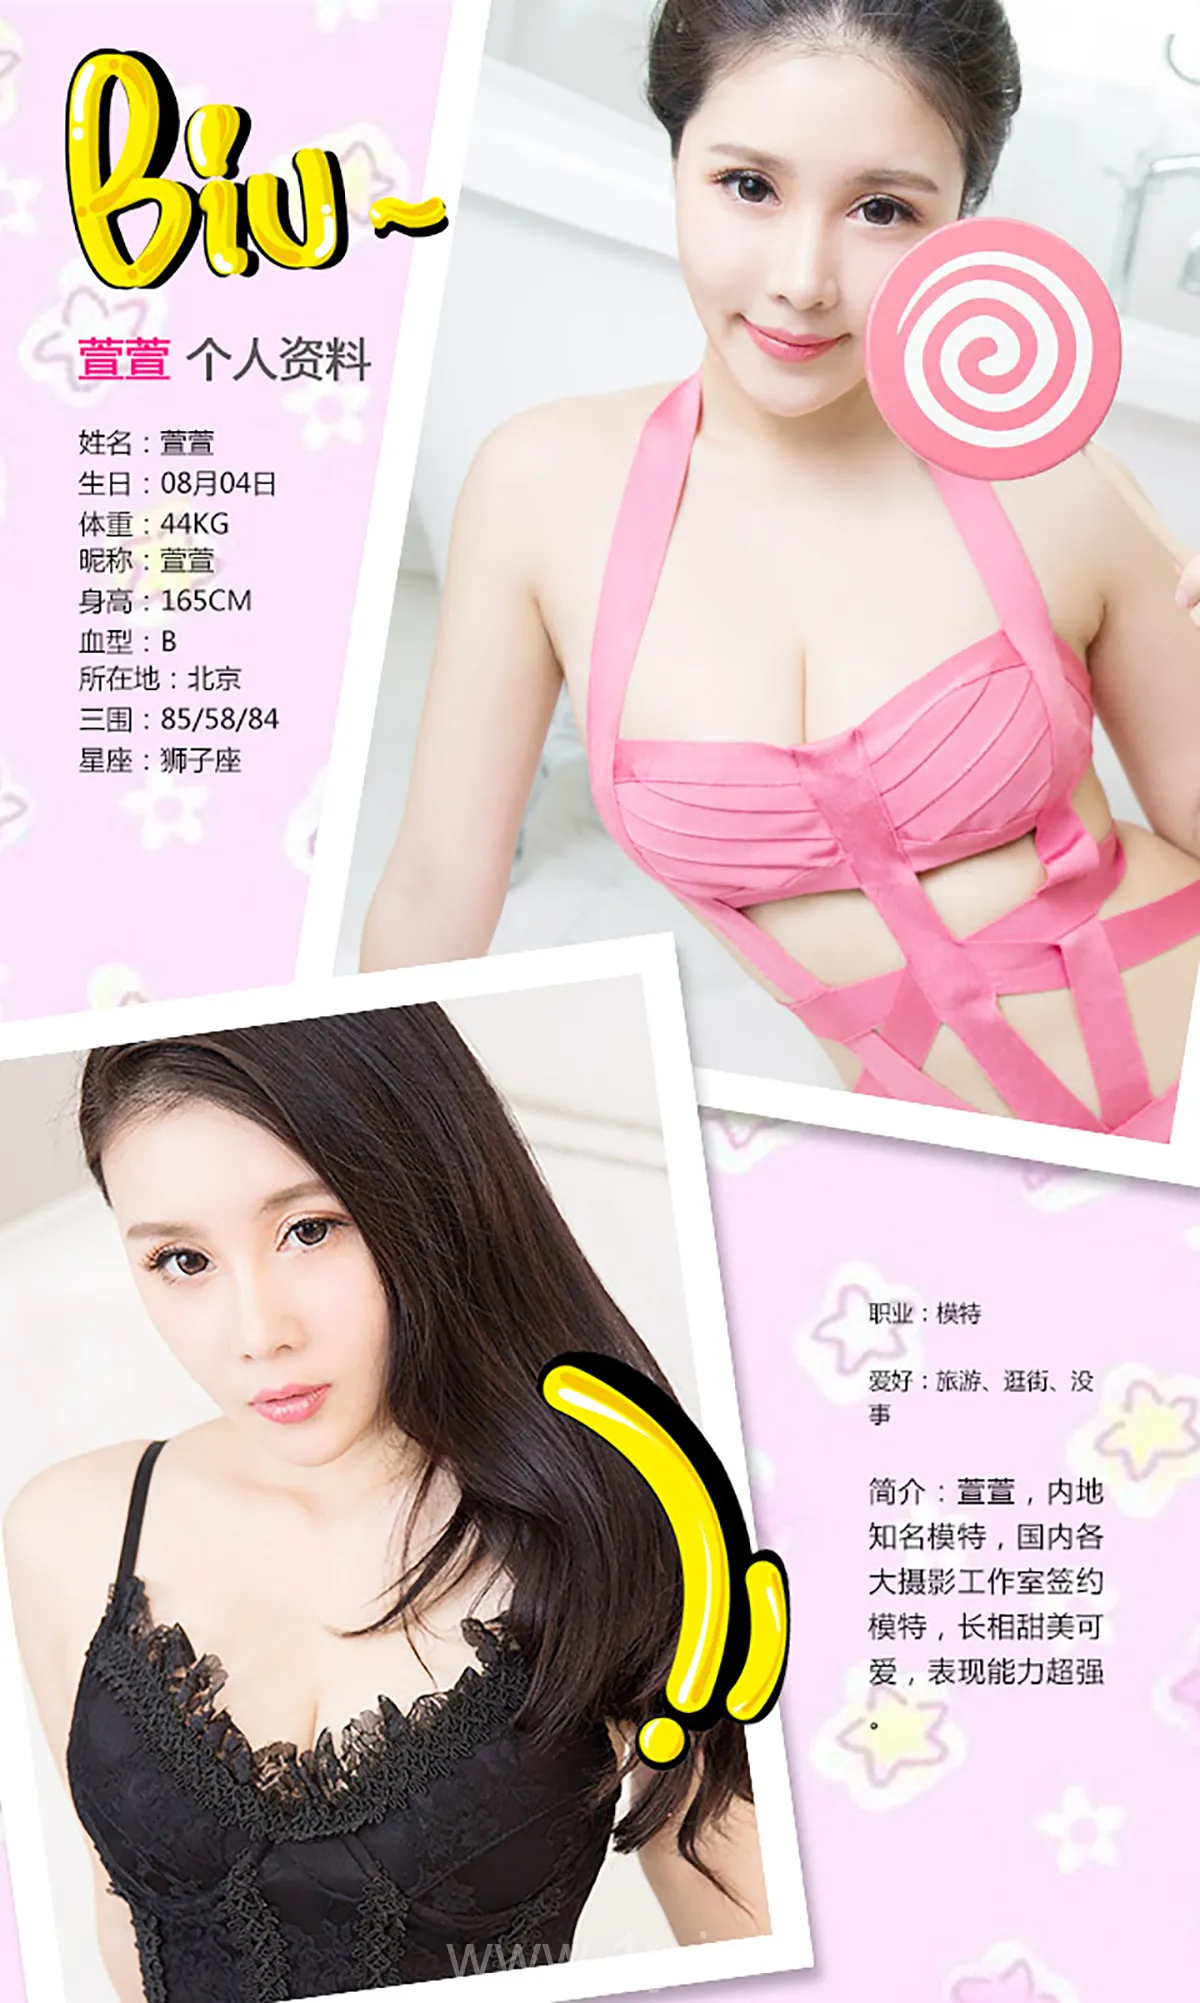 UGIRLS NO.242 Refined & Good-looking Chinese Cougar 萱萱甜言蜜语